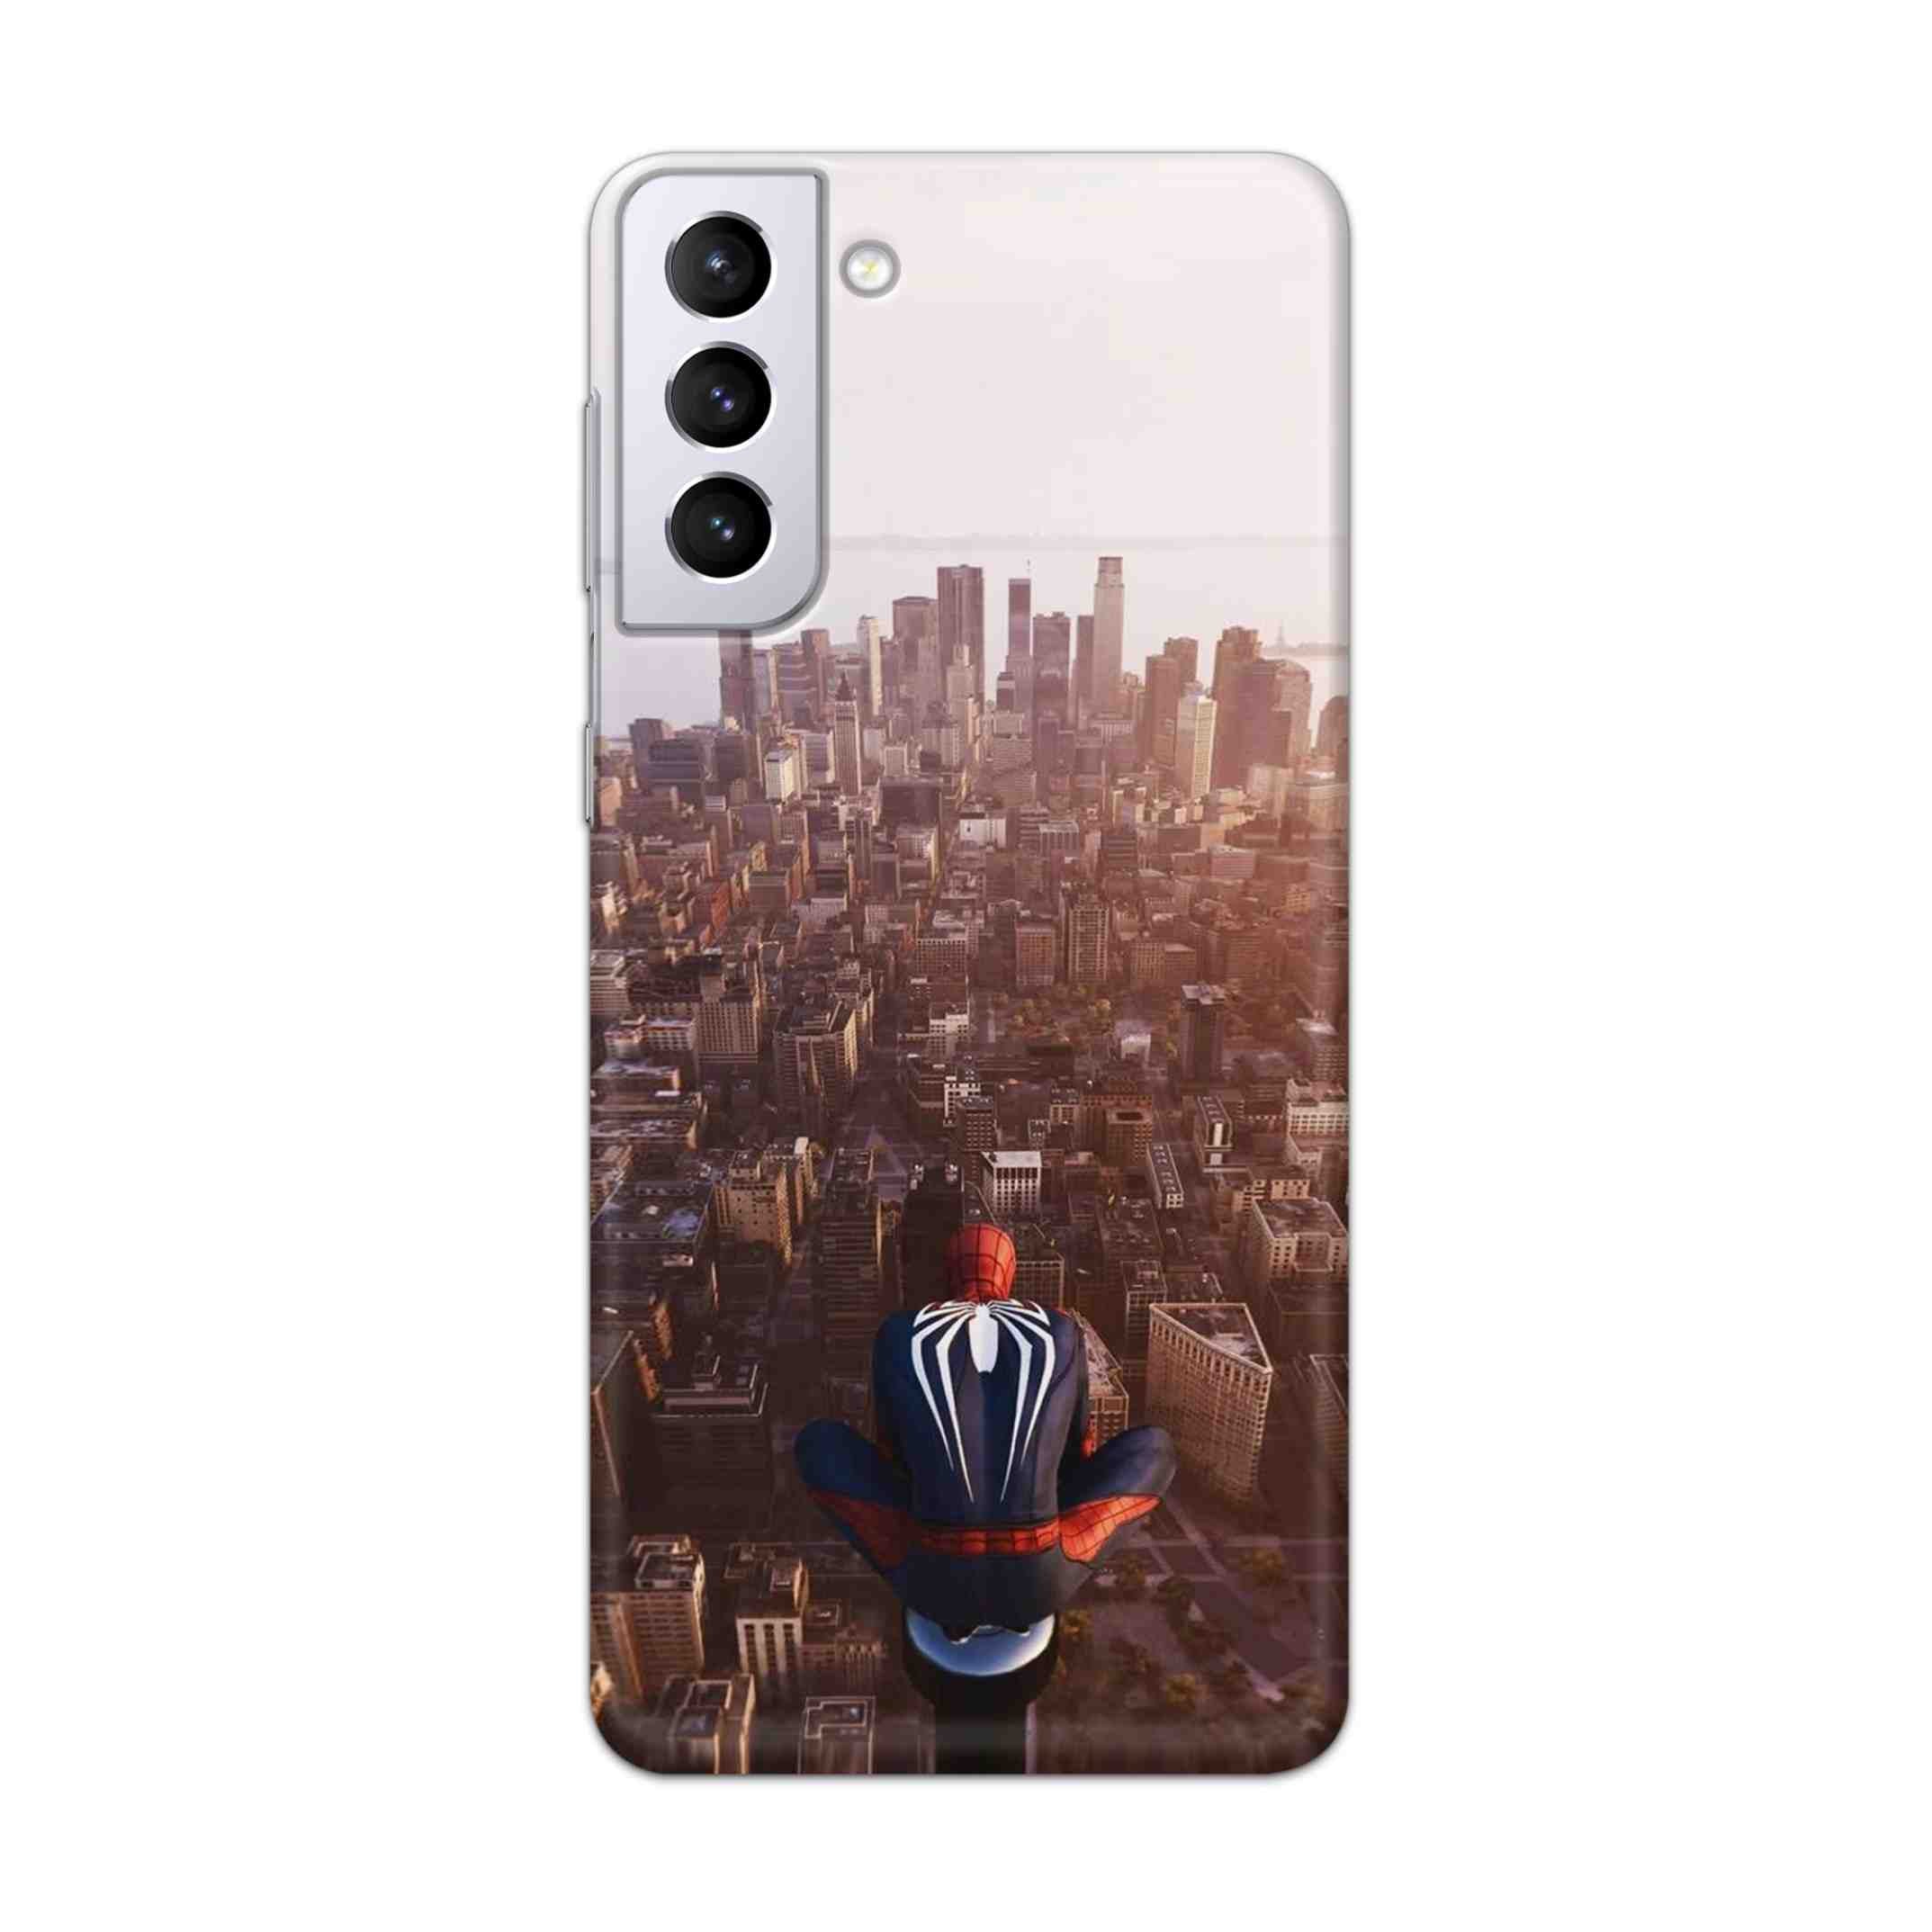 Buy City Of Spiderman Hard Back Mobile Phone Case Cover For Samsung Galaxy S21 Plus Online